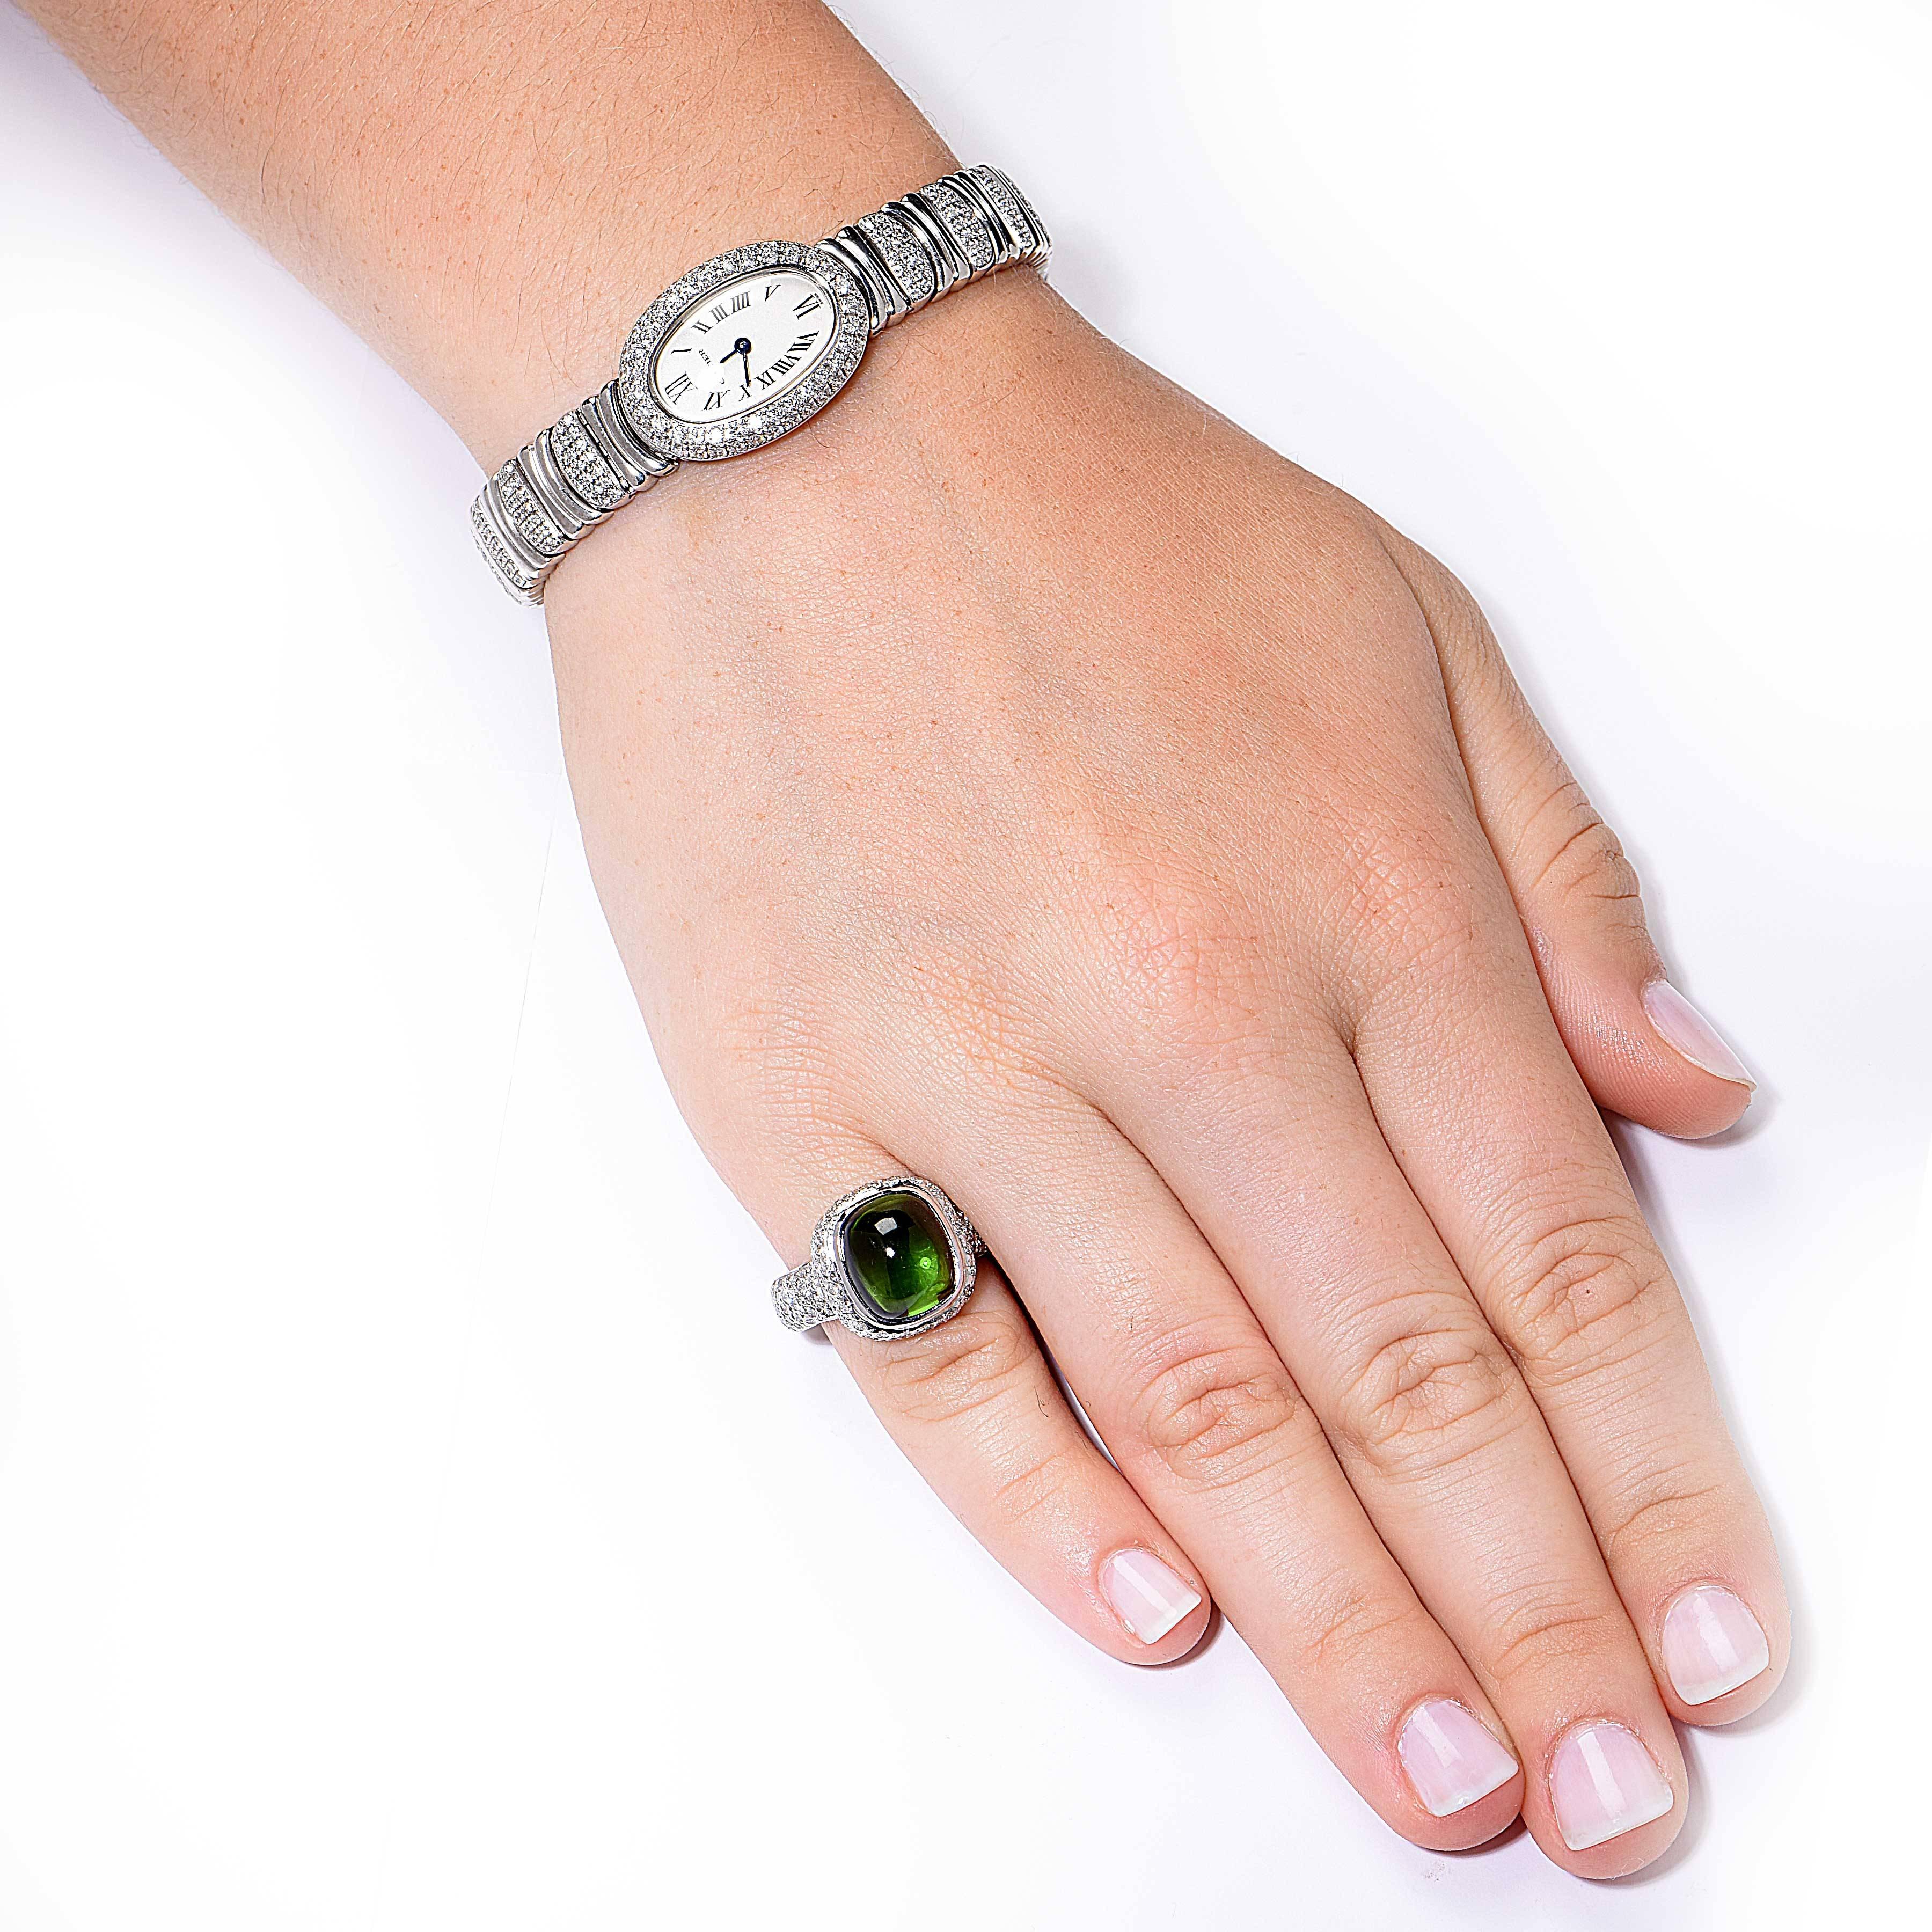 This gorgeous modern design natural green cabochon cut tourmaline and diamond ring features a 6.15 carat rich and inviting natural green tourmaline surrounded by approximately 2 carats of round brilliant cut diamonds set in 18 Karat White